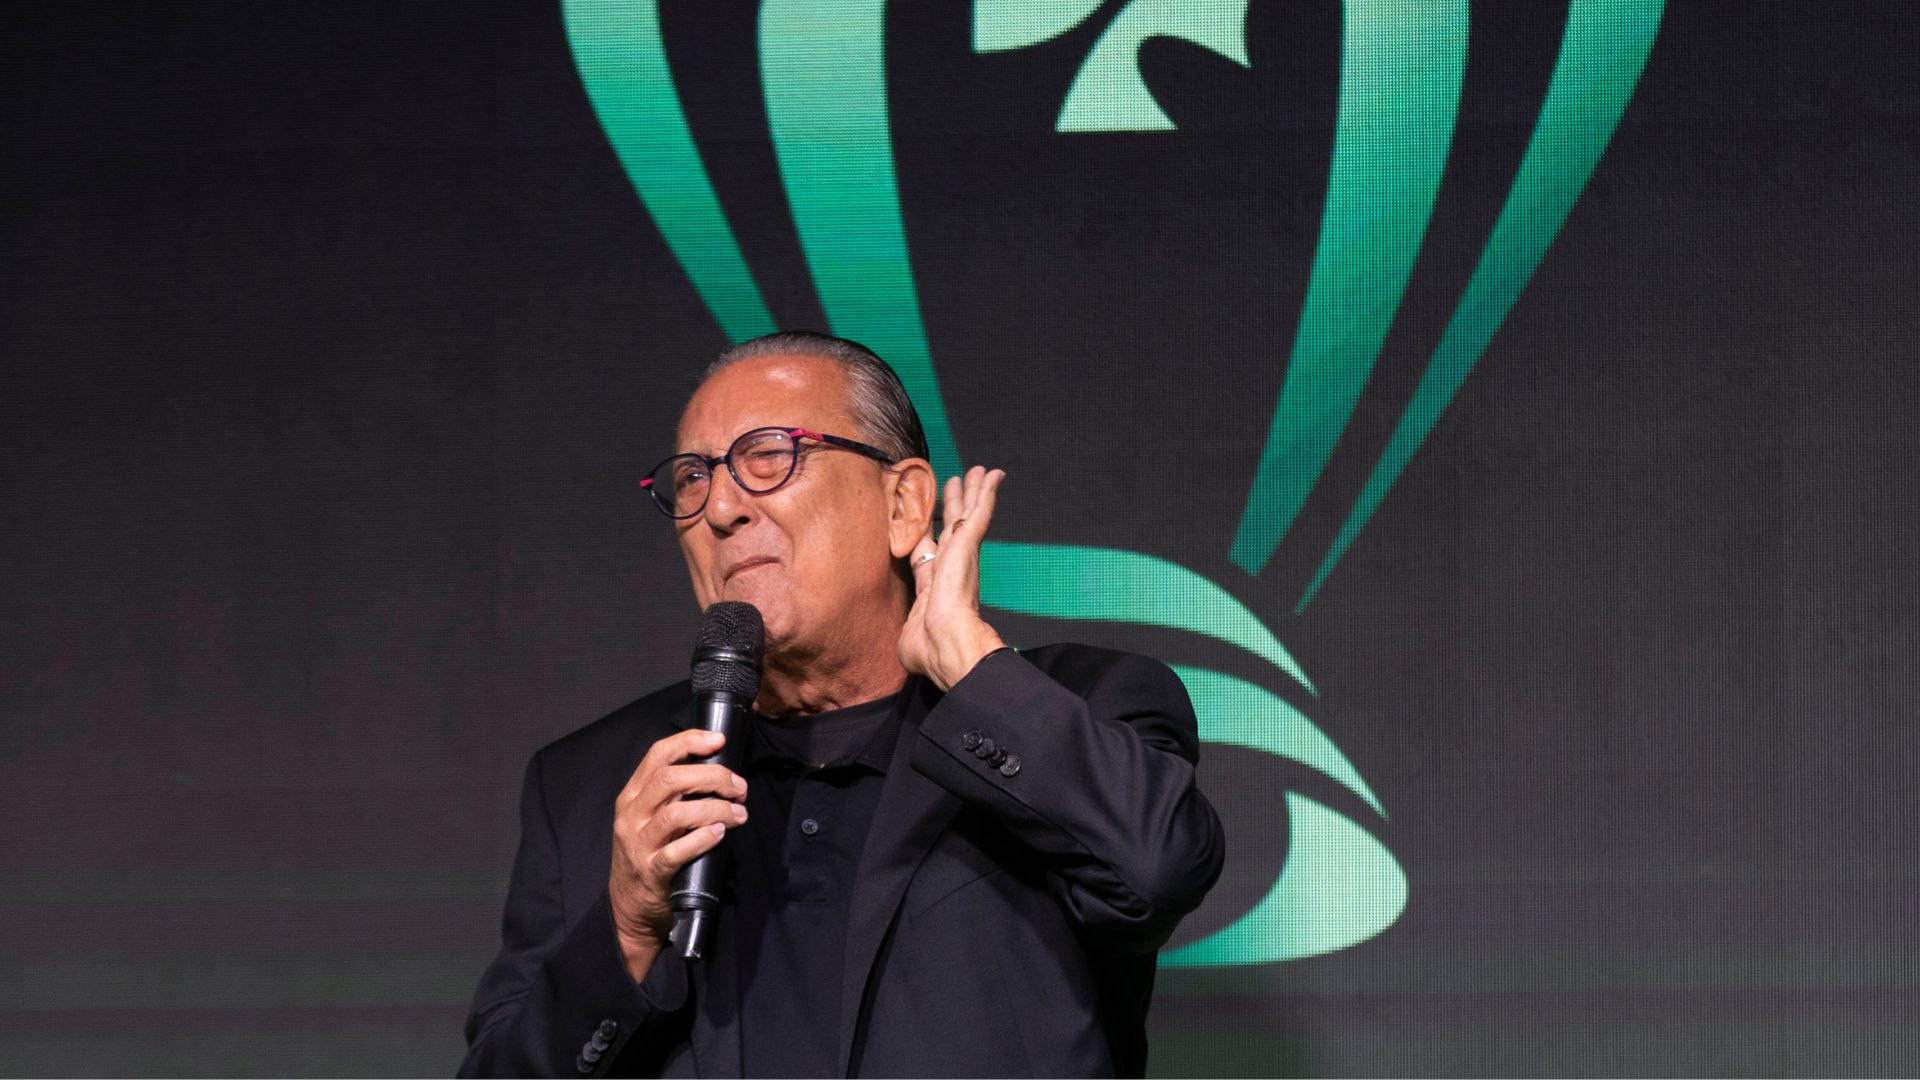 Galvão during the draw for the round of 16 of the Copa do Brasil (Credit: Thais Magalhães / CBF)